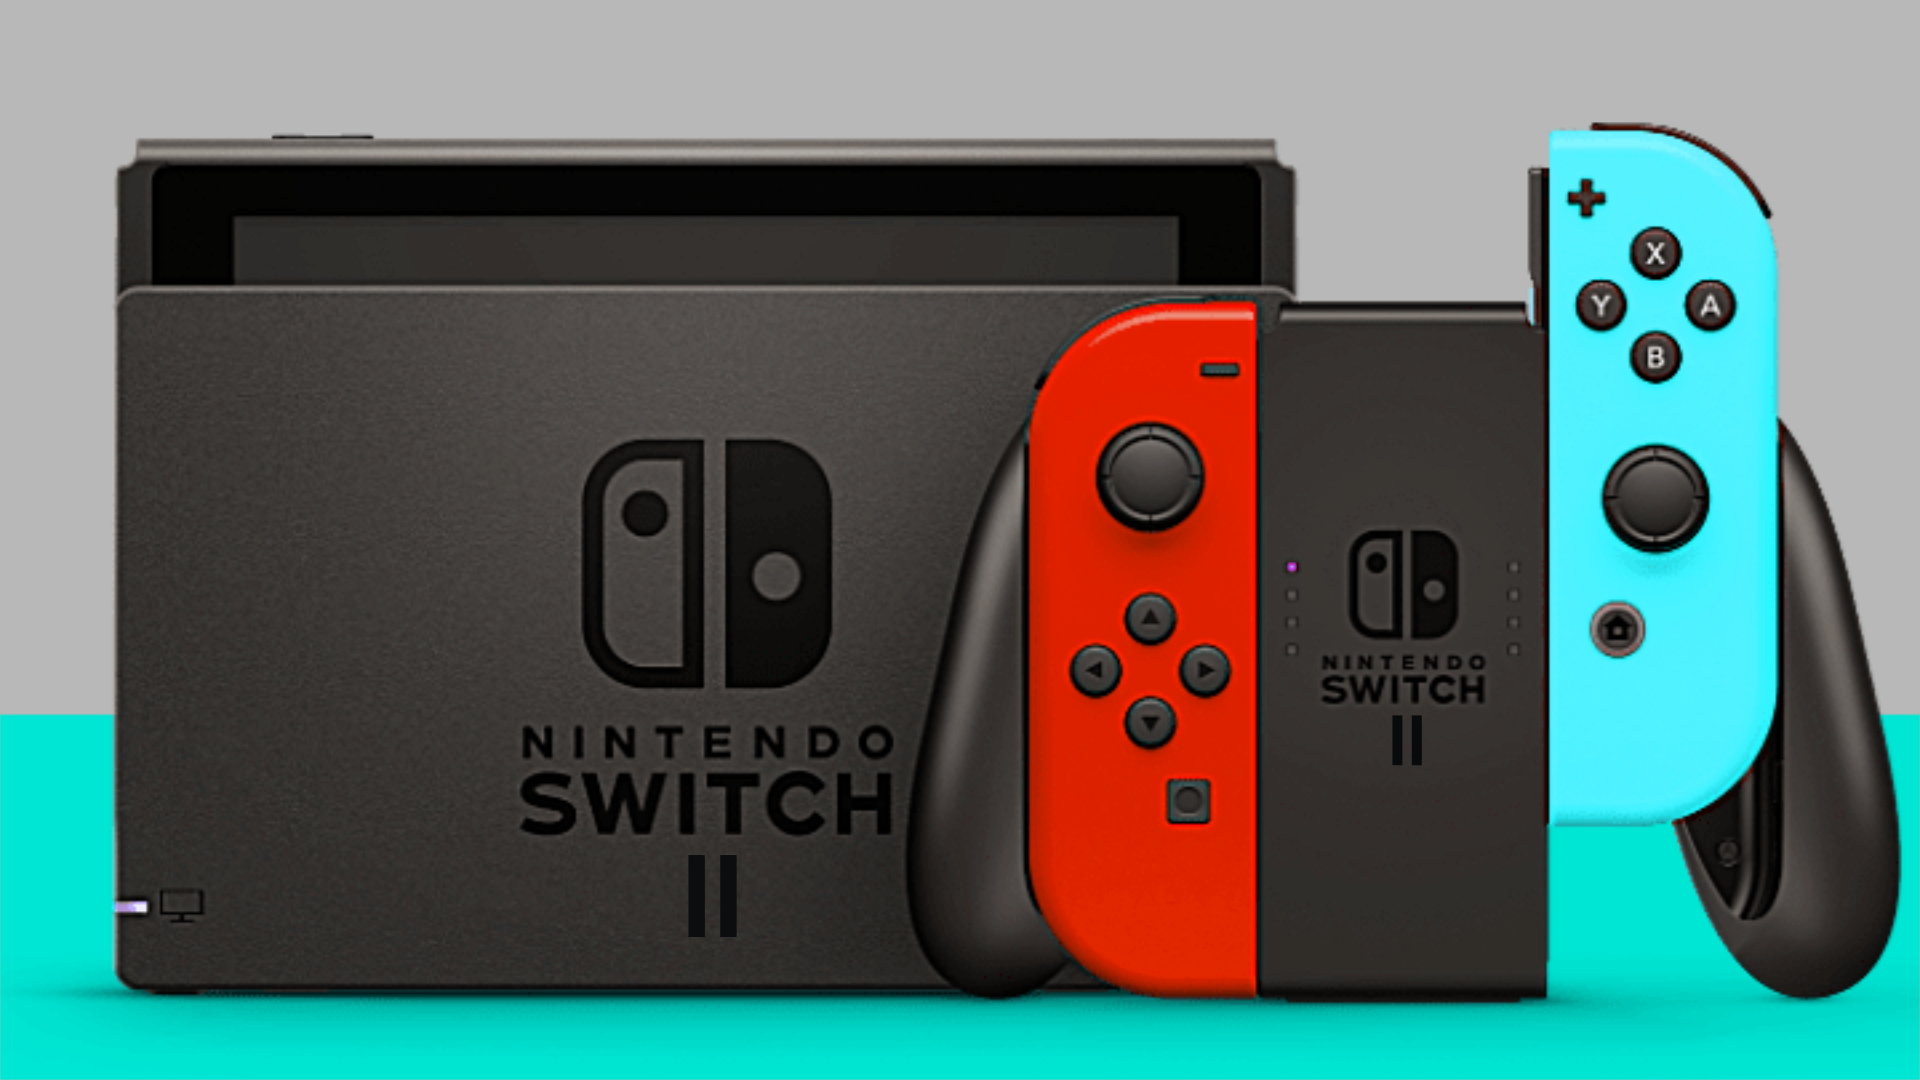 Nintendo Switch 2: The rumors and leaks are real